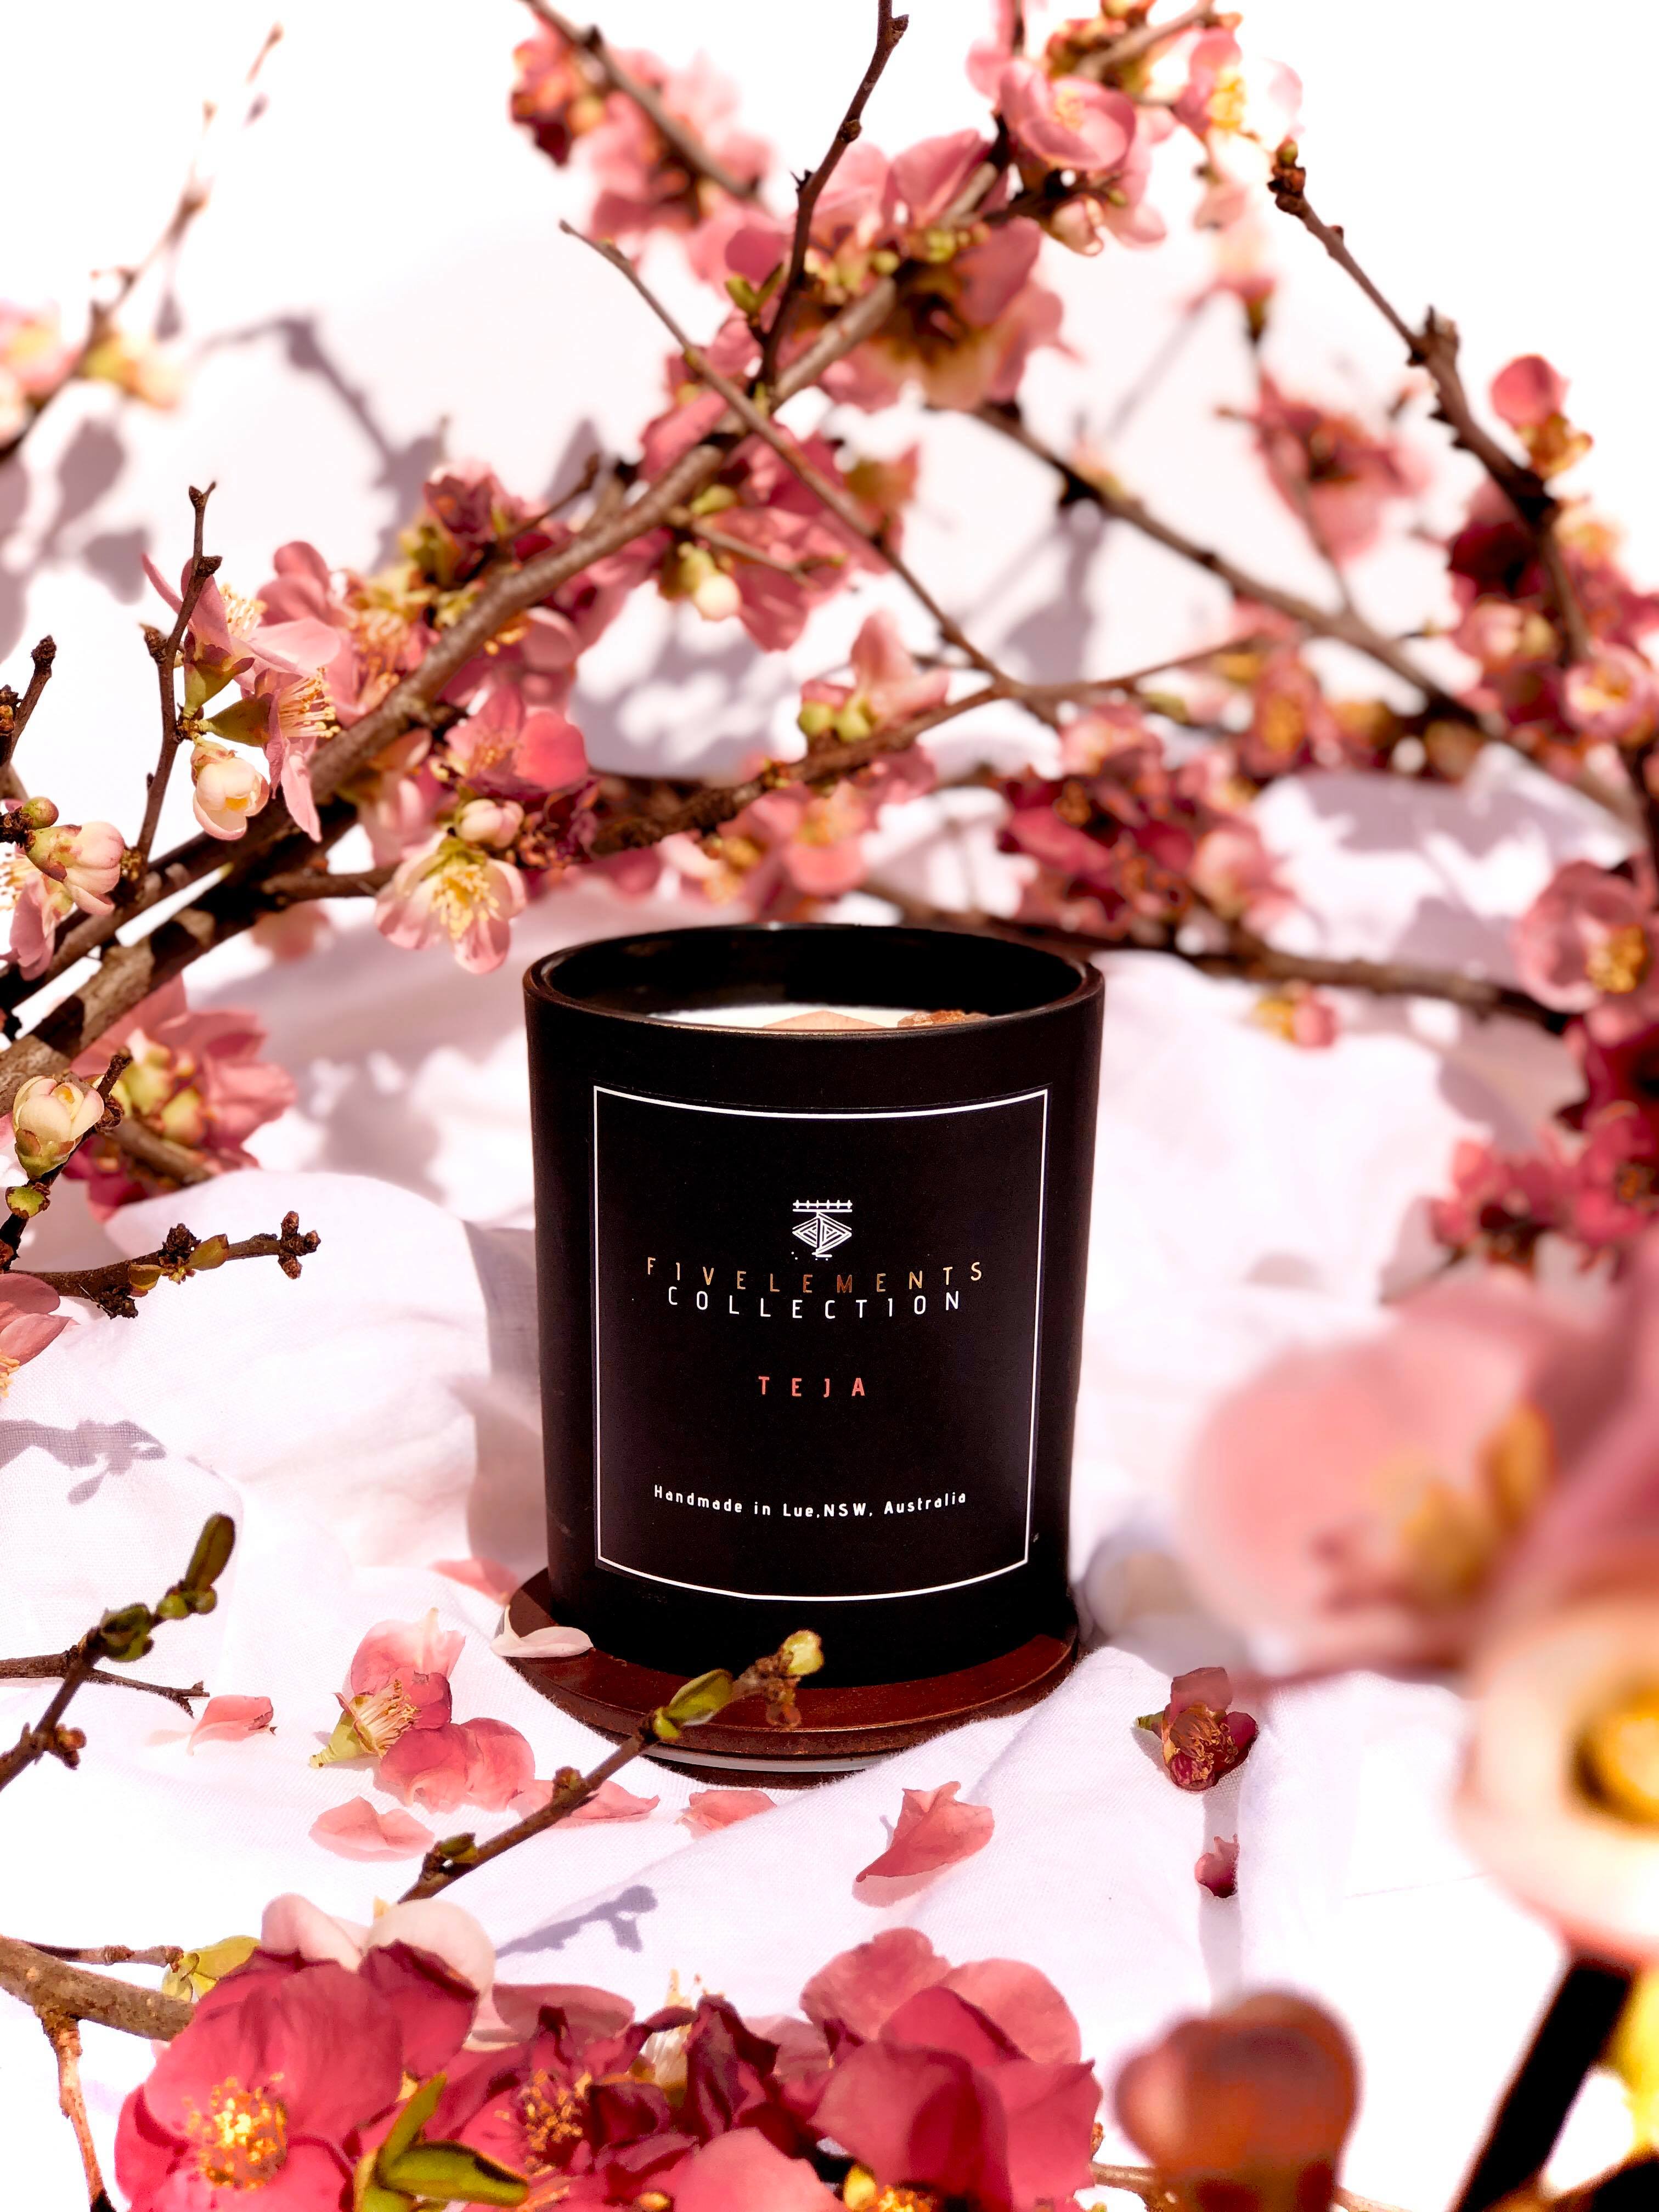 TEJA- Fire - Crystal Infused Candle